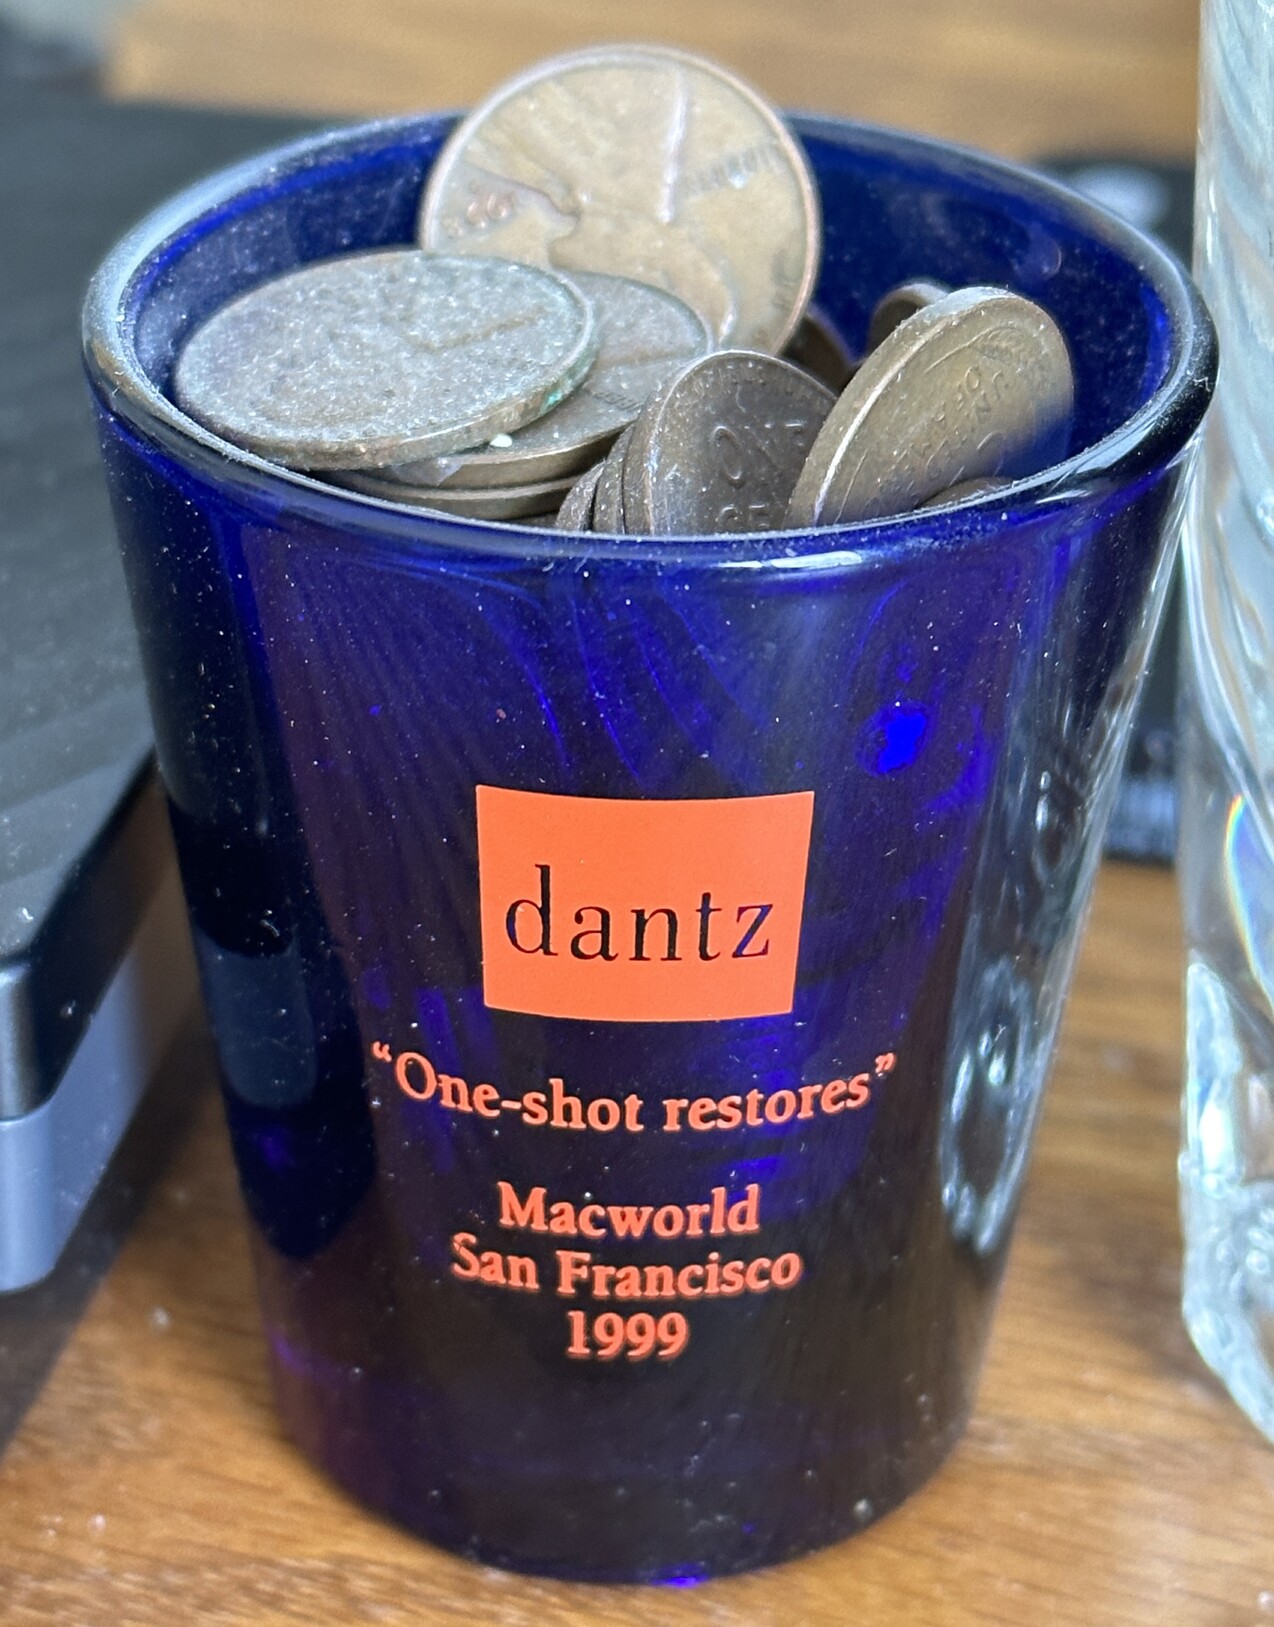 Blue Dantz shot glass from MacWorld San Francisco 1999 with red Dantz logo and lettering that says “One-shot restores” and is full of old, dusty pennies